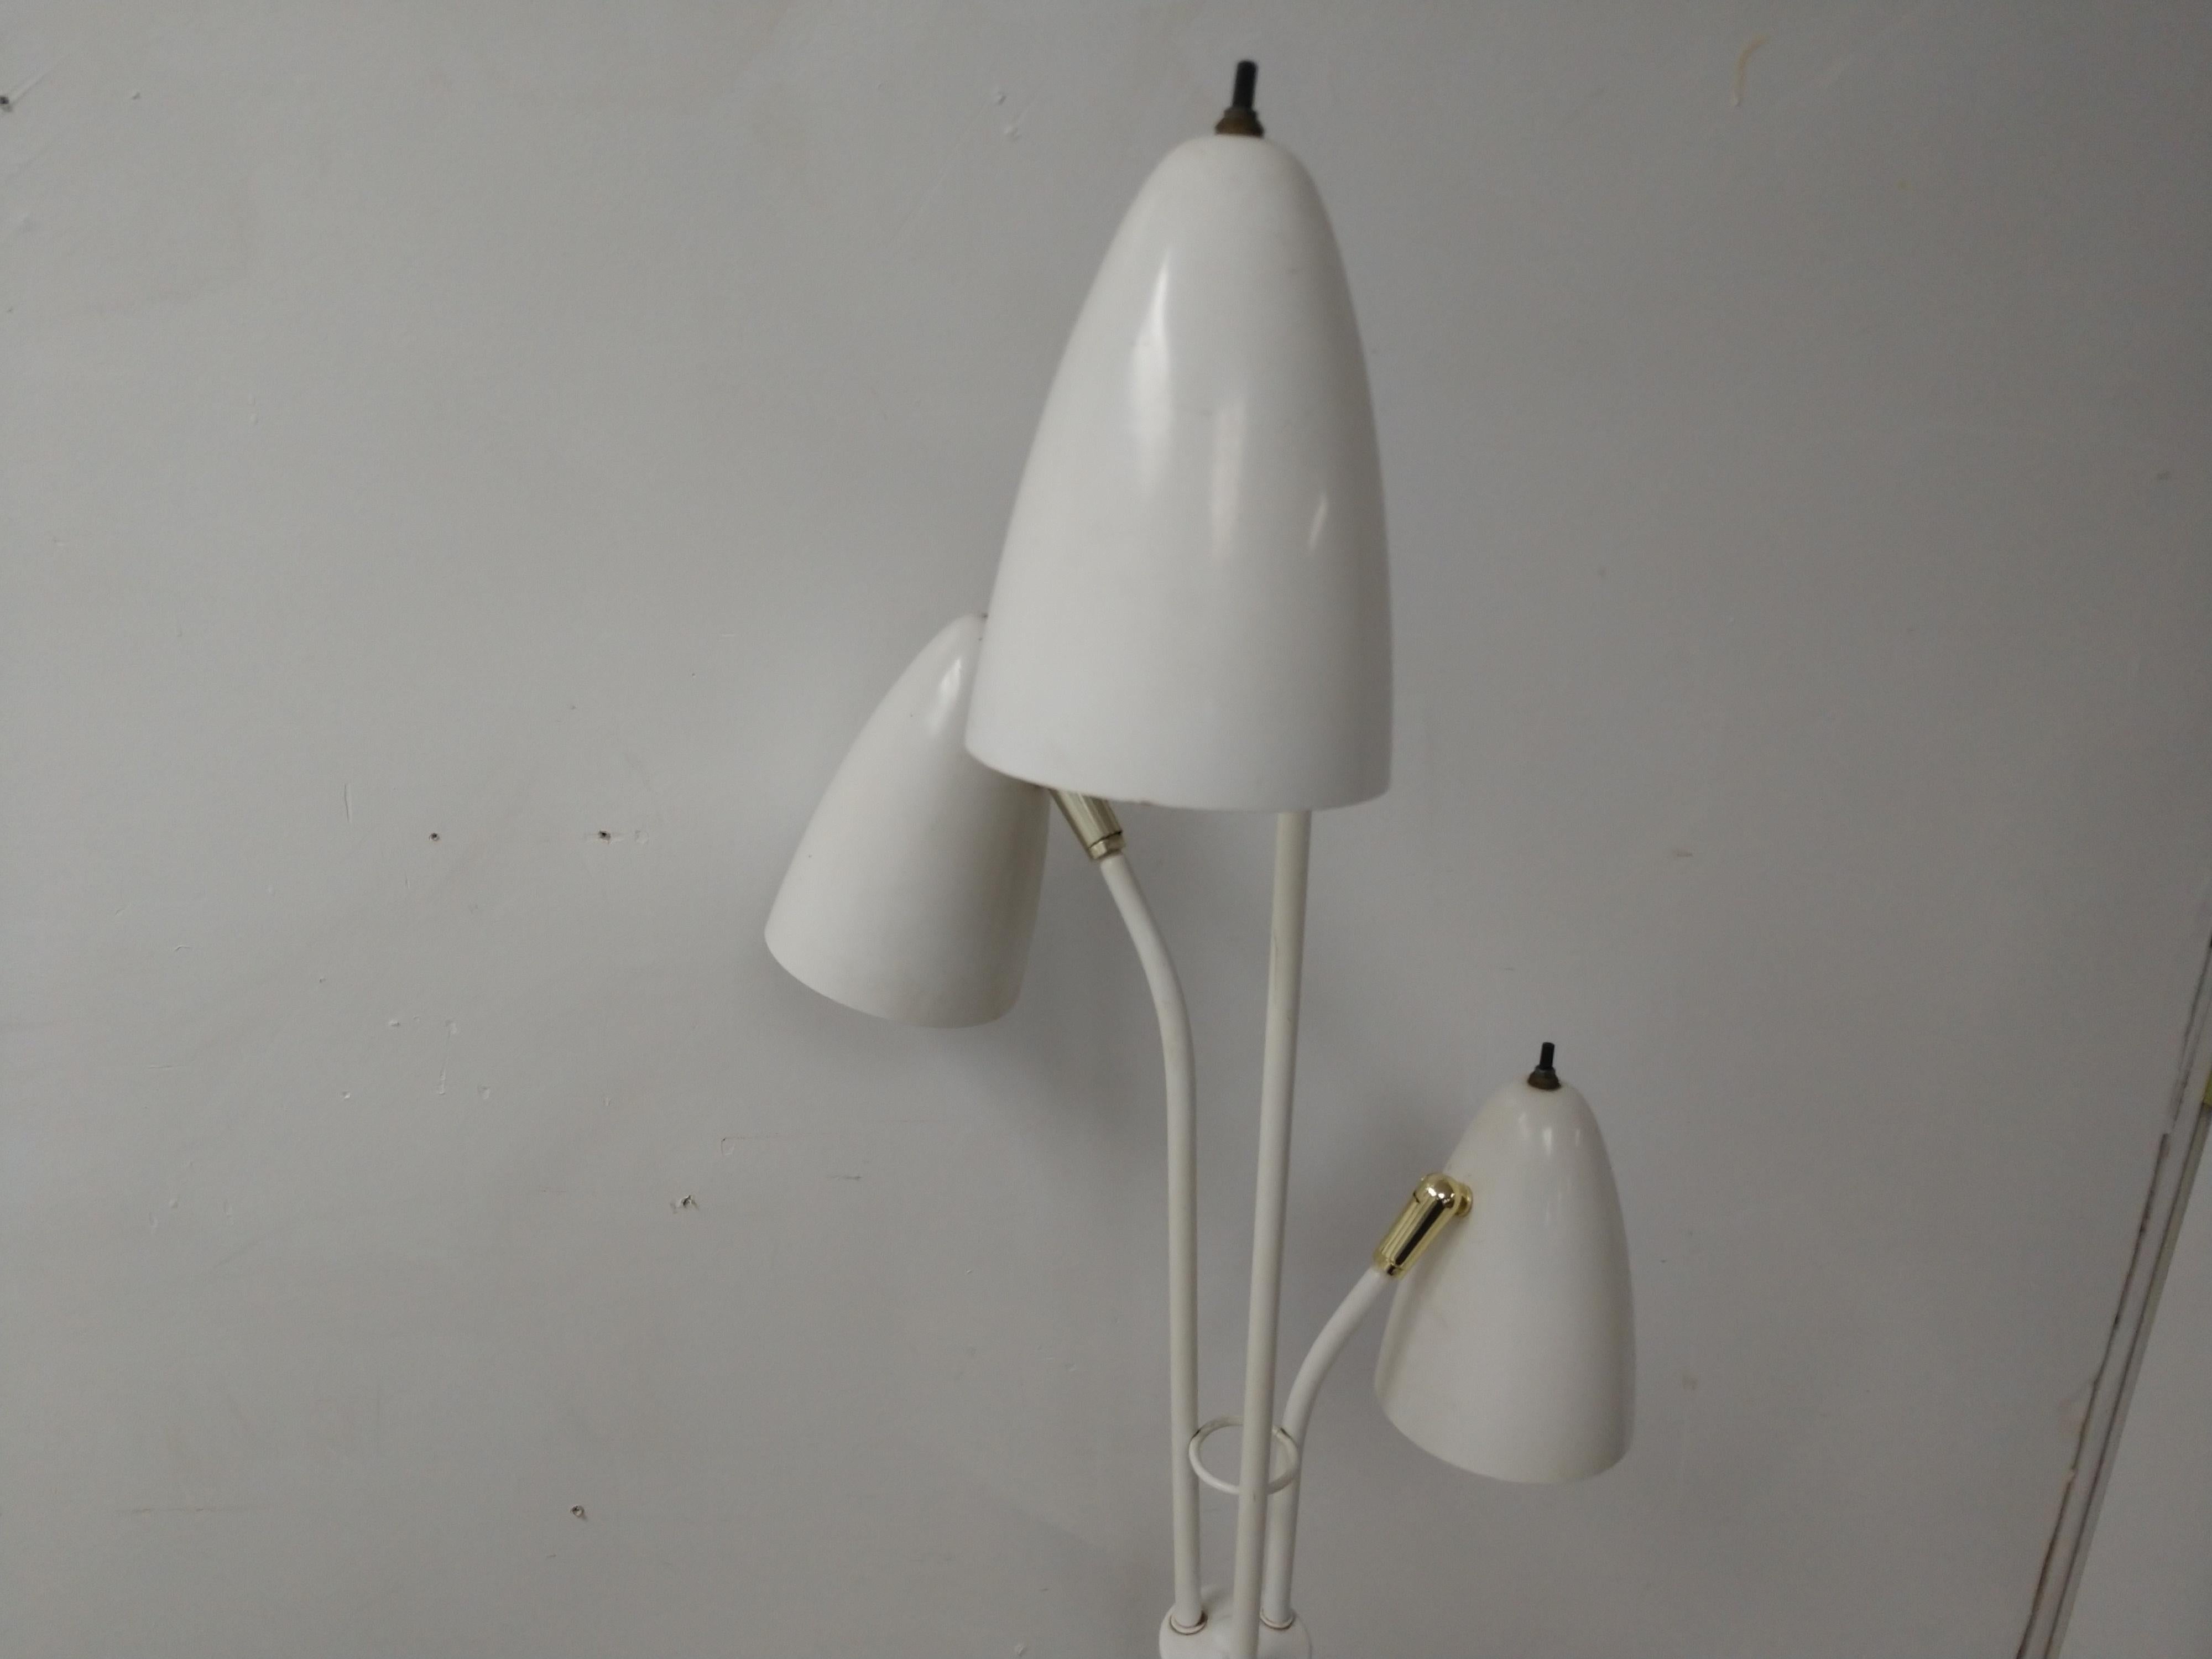 Fabulous floor lamp with three totally adjustable lamp heads. Each lamp has its own switch and can be positioned at all angles. In original condition, ivory white with brass accents. This lamp can be parcel posted.